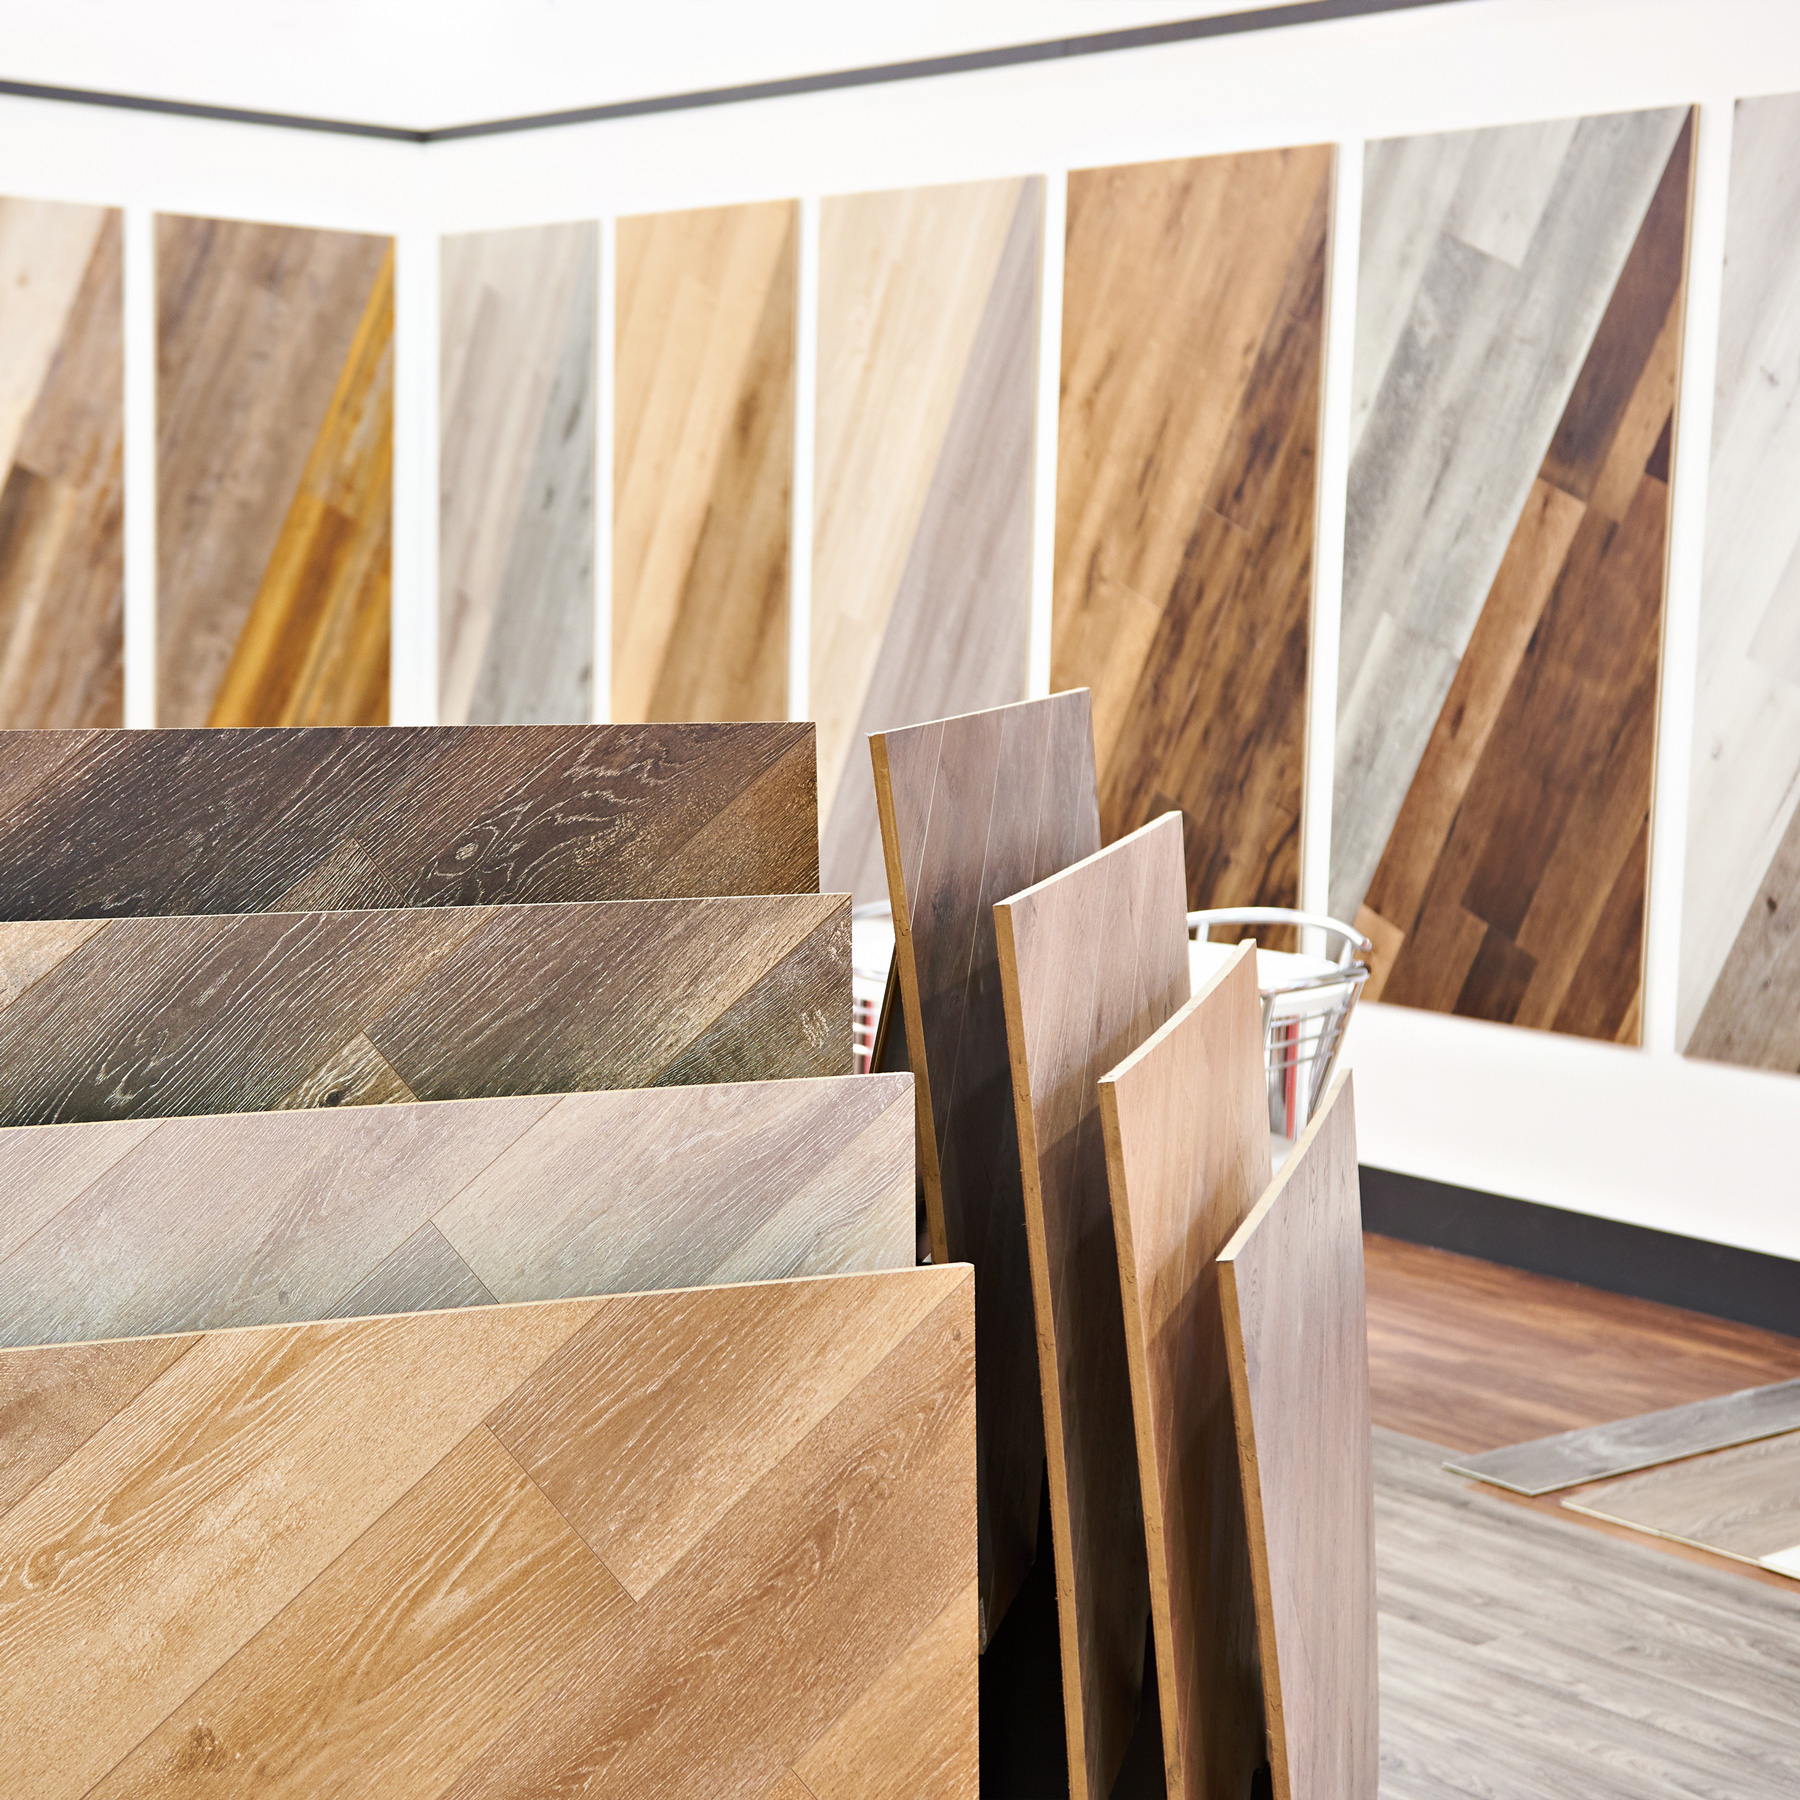 Selection of hardwood in a showroom